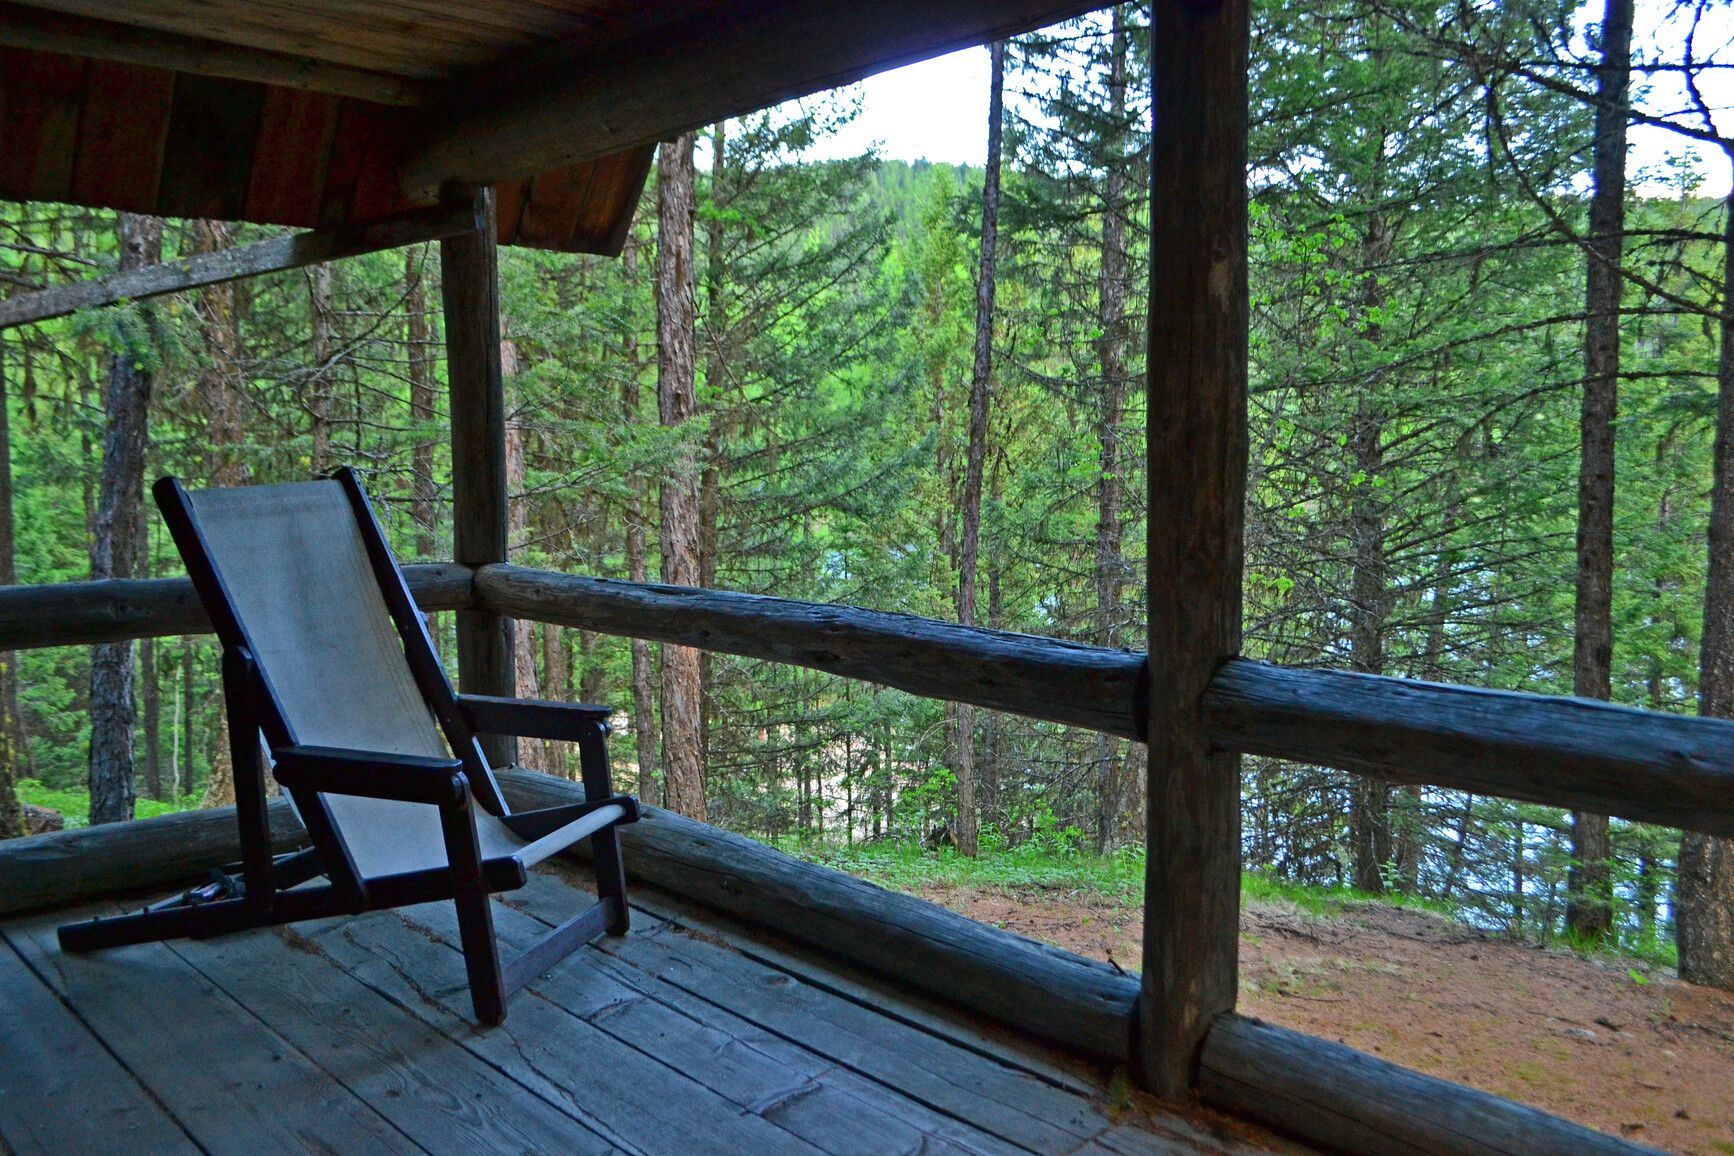 Take in the forest and lake view from the log cabin shelter's deck. A simple wooden chair awaits. Conckle Lake Park.